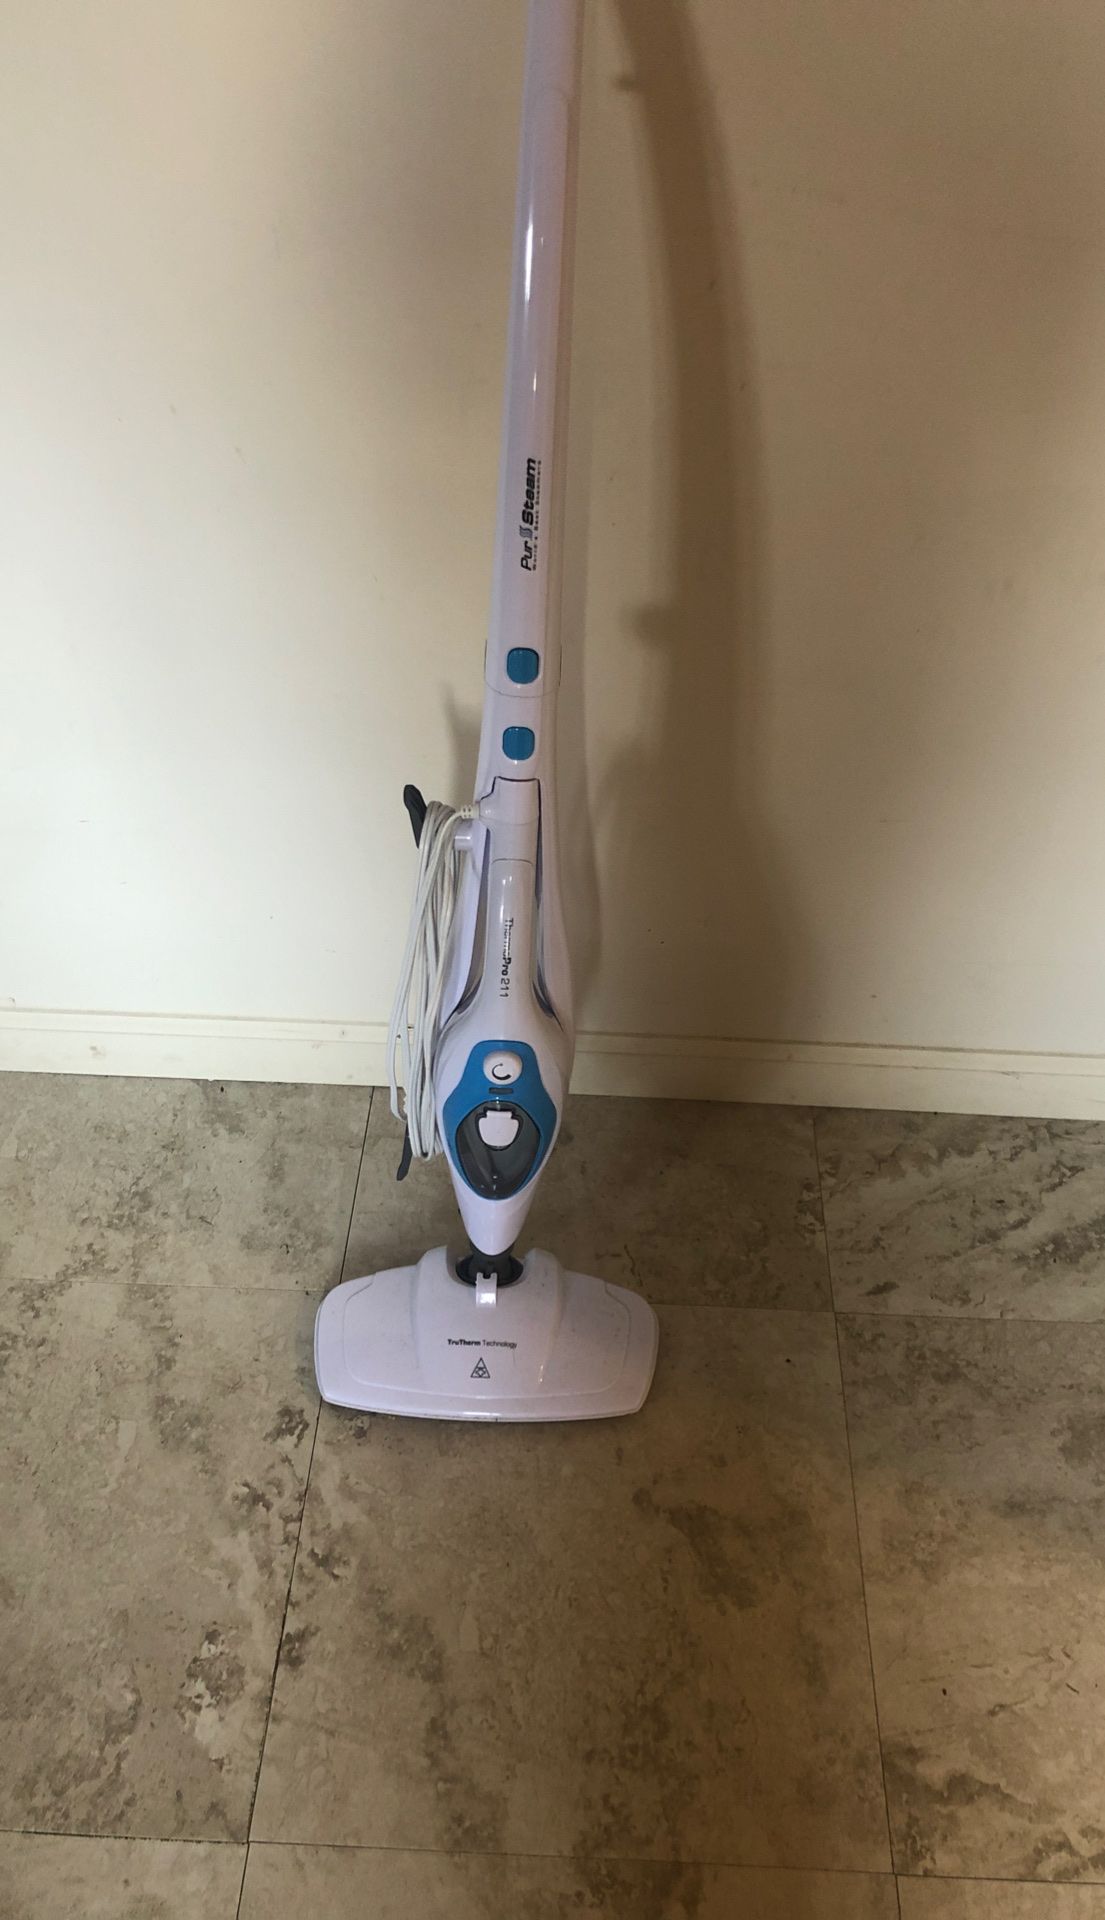 Steam mop with Detachable handheld